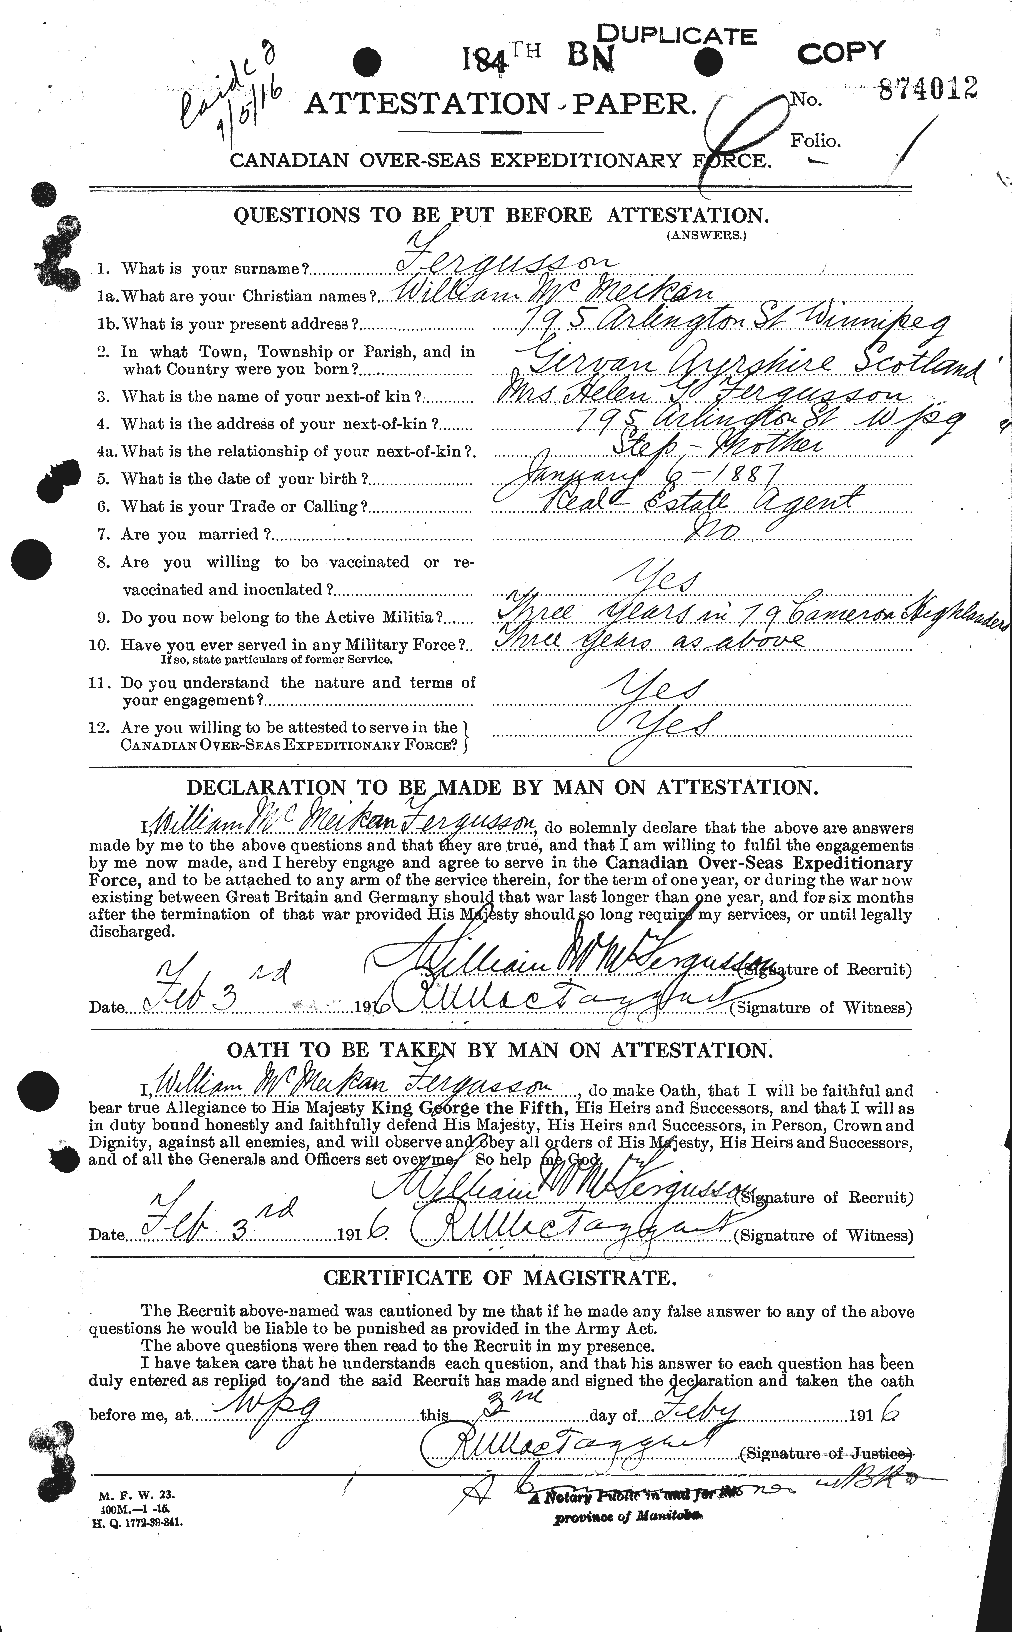 Personnel Records of the First World War - CEF 322174a